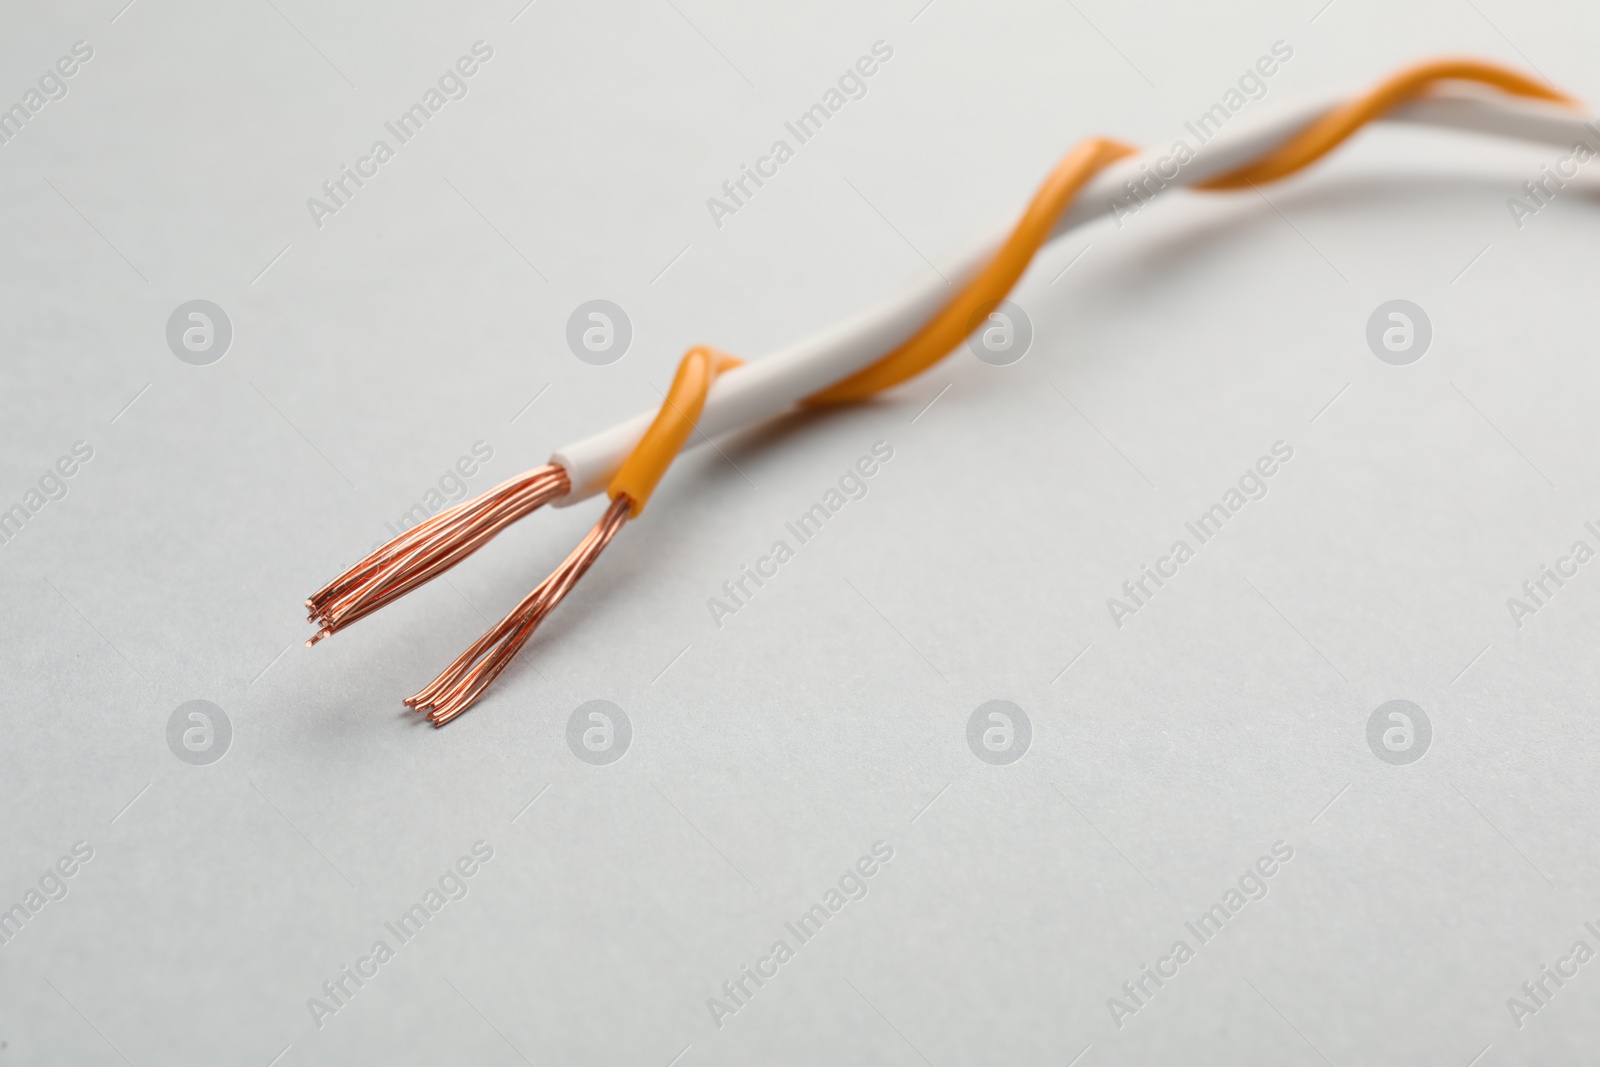 Photo of Two twisted electrical wires on light background, closeup